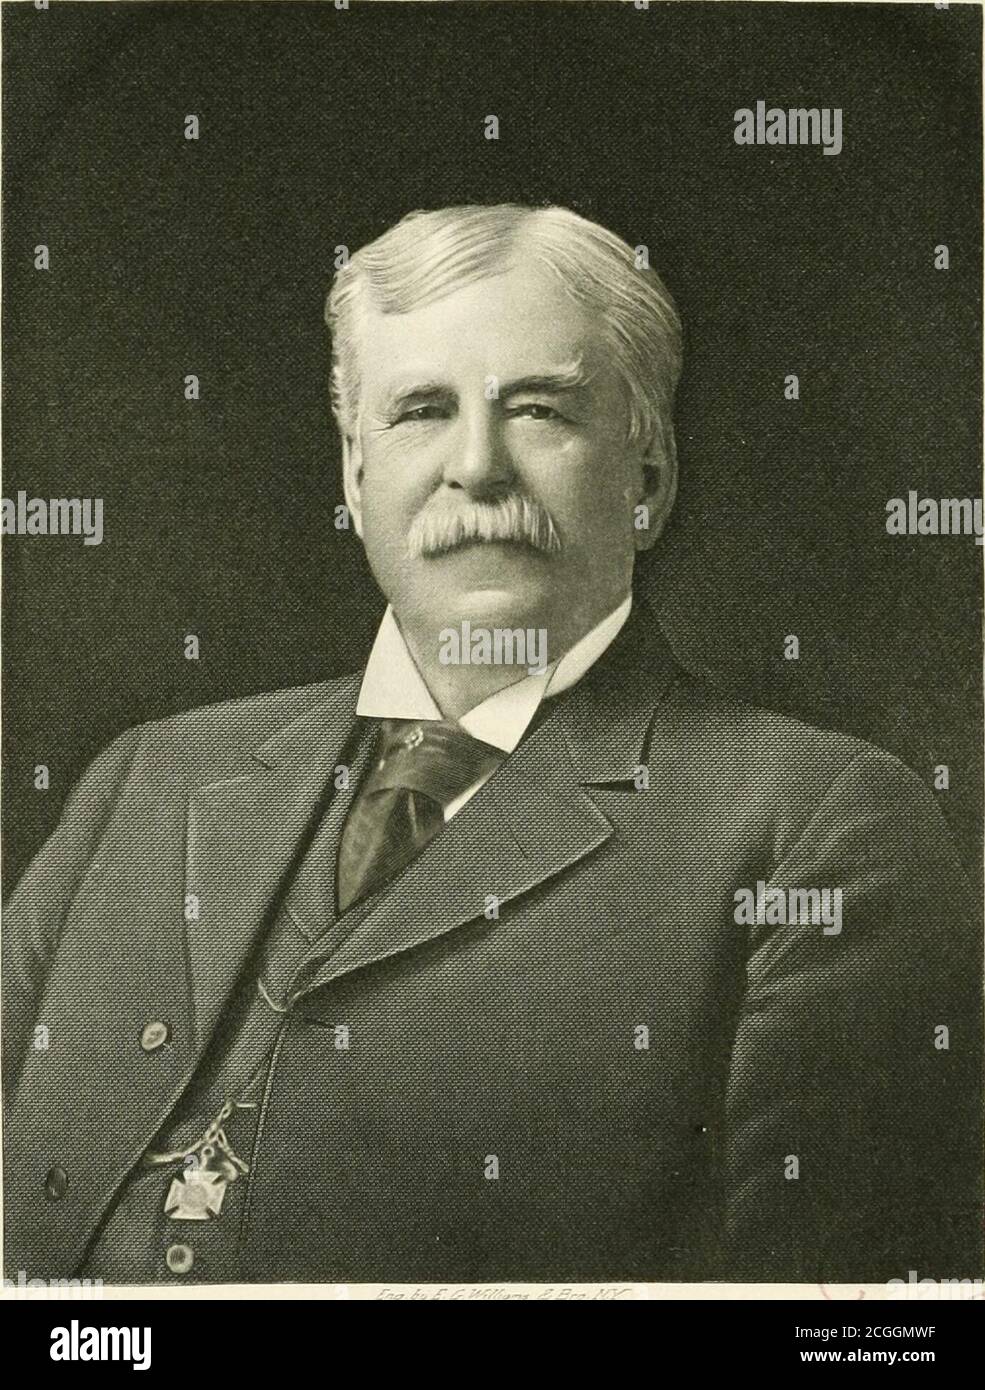 . Biographical history of Massachusetts : biographies and autobiographies of the leading men in the state . v-/,- GEORGE HENRY GRAVES GEORGE HENRY GRAVES was born in West Fairlee,Vermont, March 10, 1844, the son of George W. Graves,born February 14, 1805, died July 26, 1879, and LaurindaWatson. His grandfathers were Abner Graves, born 1780, died in■■I860, and David Watson, born in 1776, and died 1865; his grand-mothers, Katherine Kibhng Graves and Nancy EUiot Watson. Hisfather, one of the early California gold seekers, was a hotel pro-prietor and postmaster at East Randolph, Vermont. His marke Stock Photo